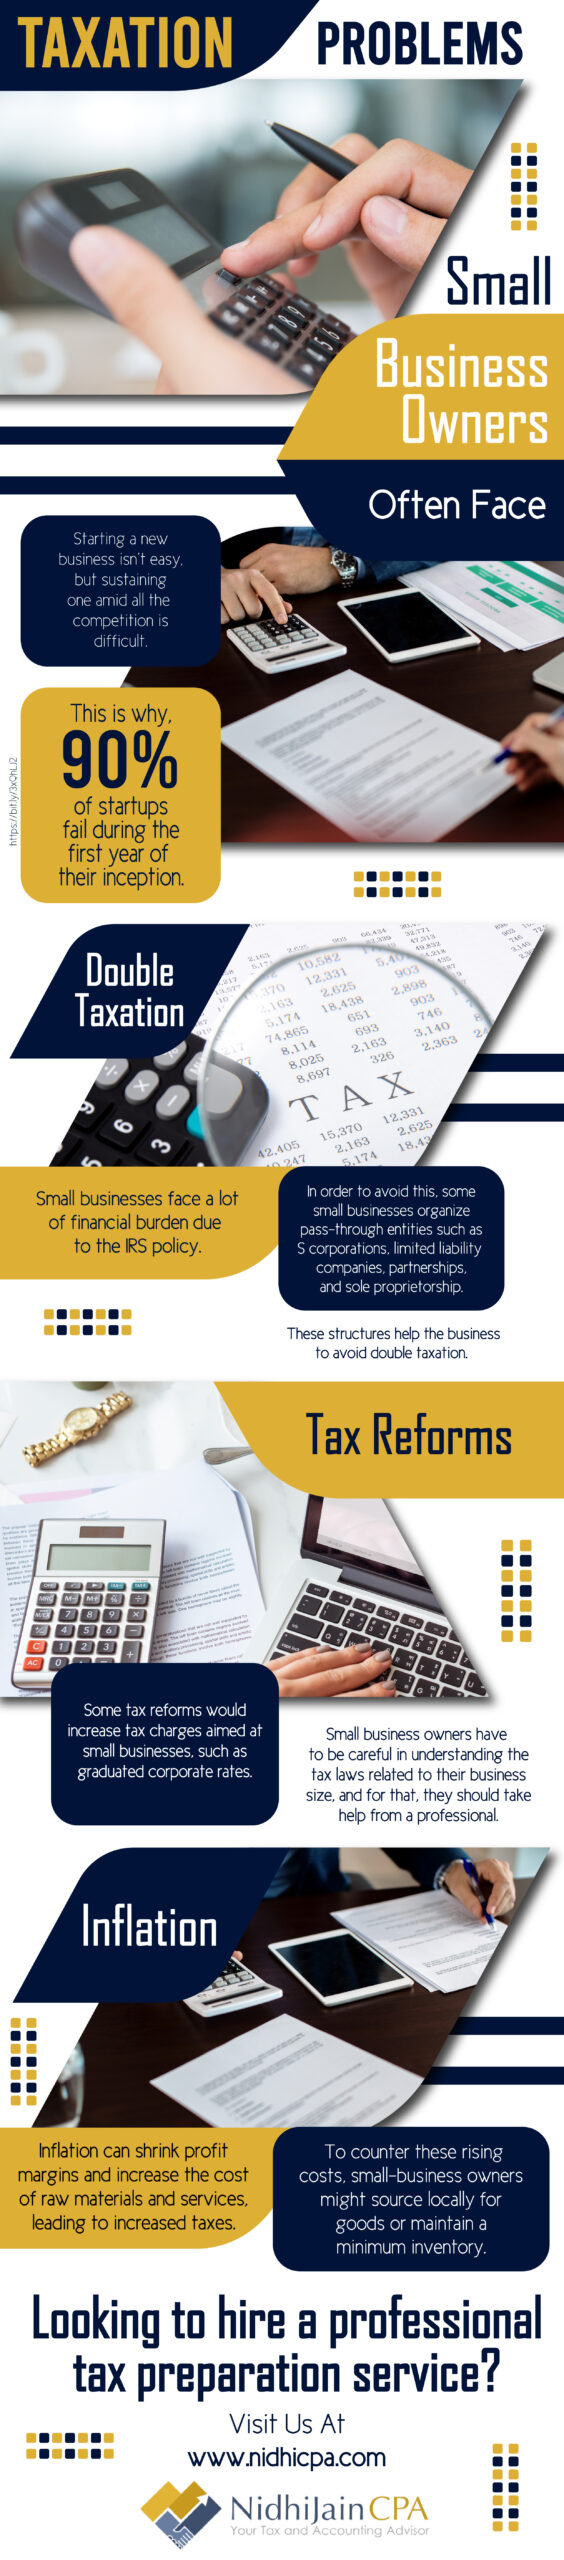 Taxation Problems Small Business Owners Often Face